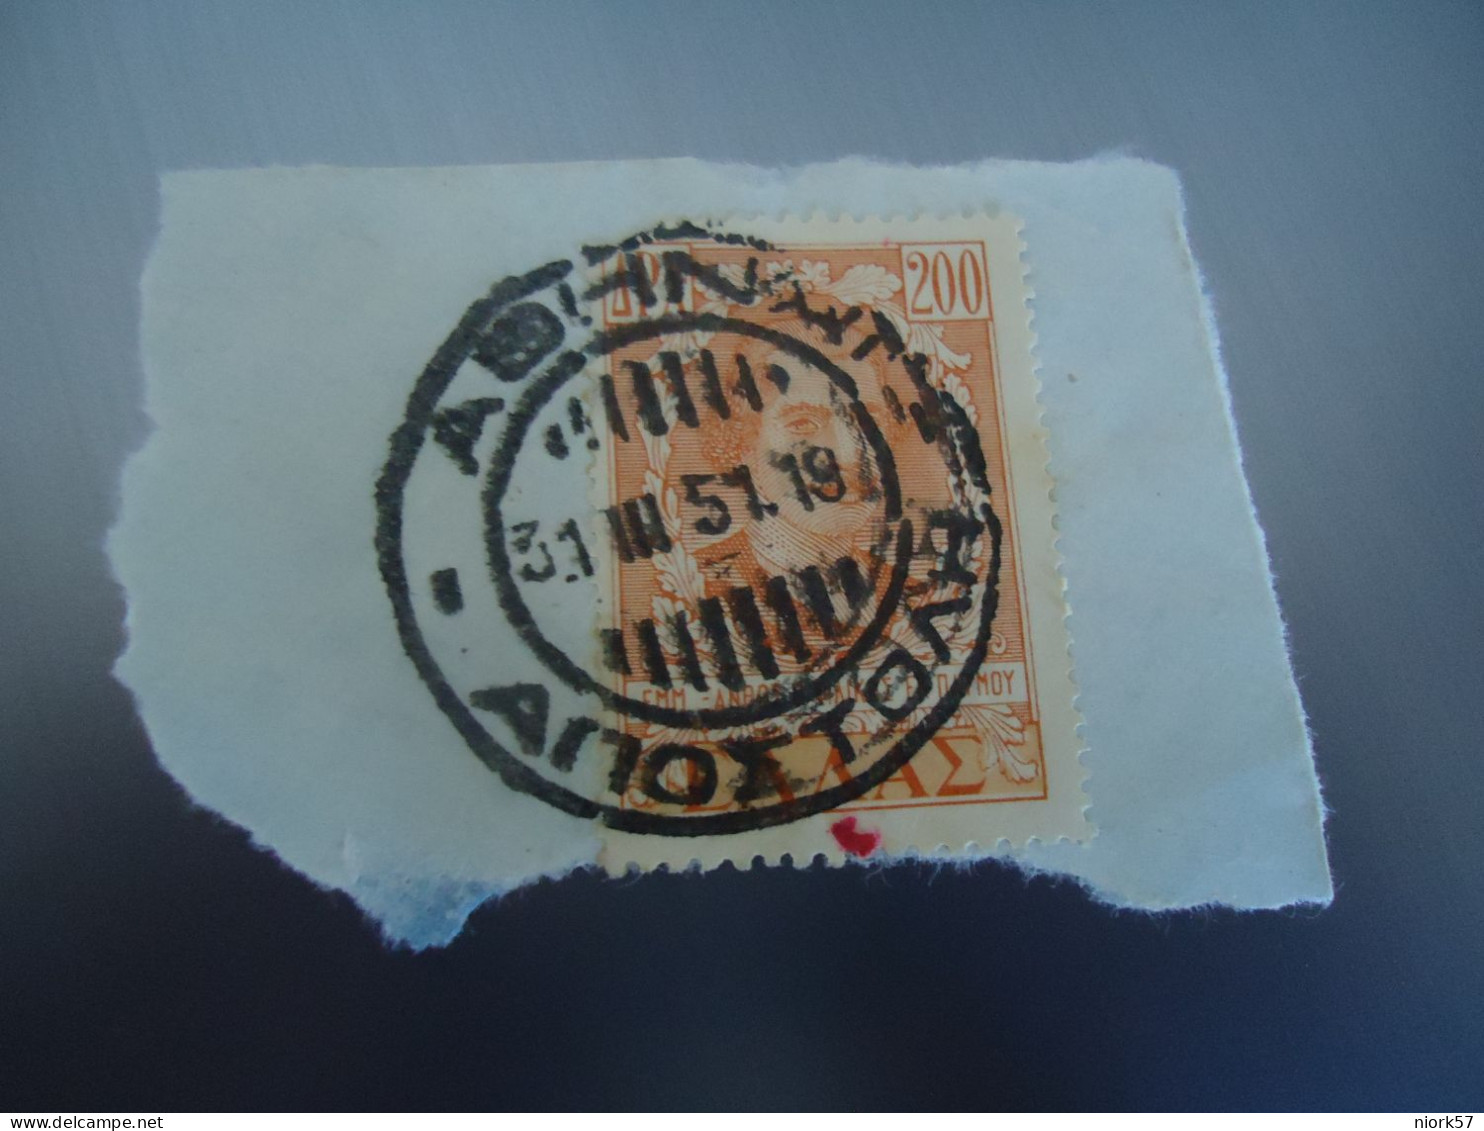 GREECE   STAMPS  WITH POSTMARK   ΑΘΗΝAI  19   ΑΠΟΣΤΟΛΗ - Affrancature Meccaniche Rosse (EMA)